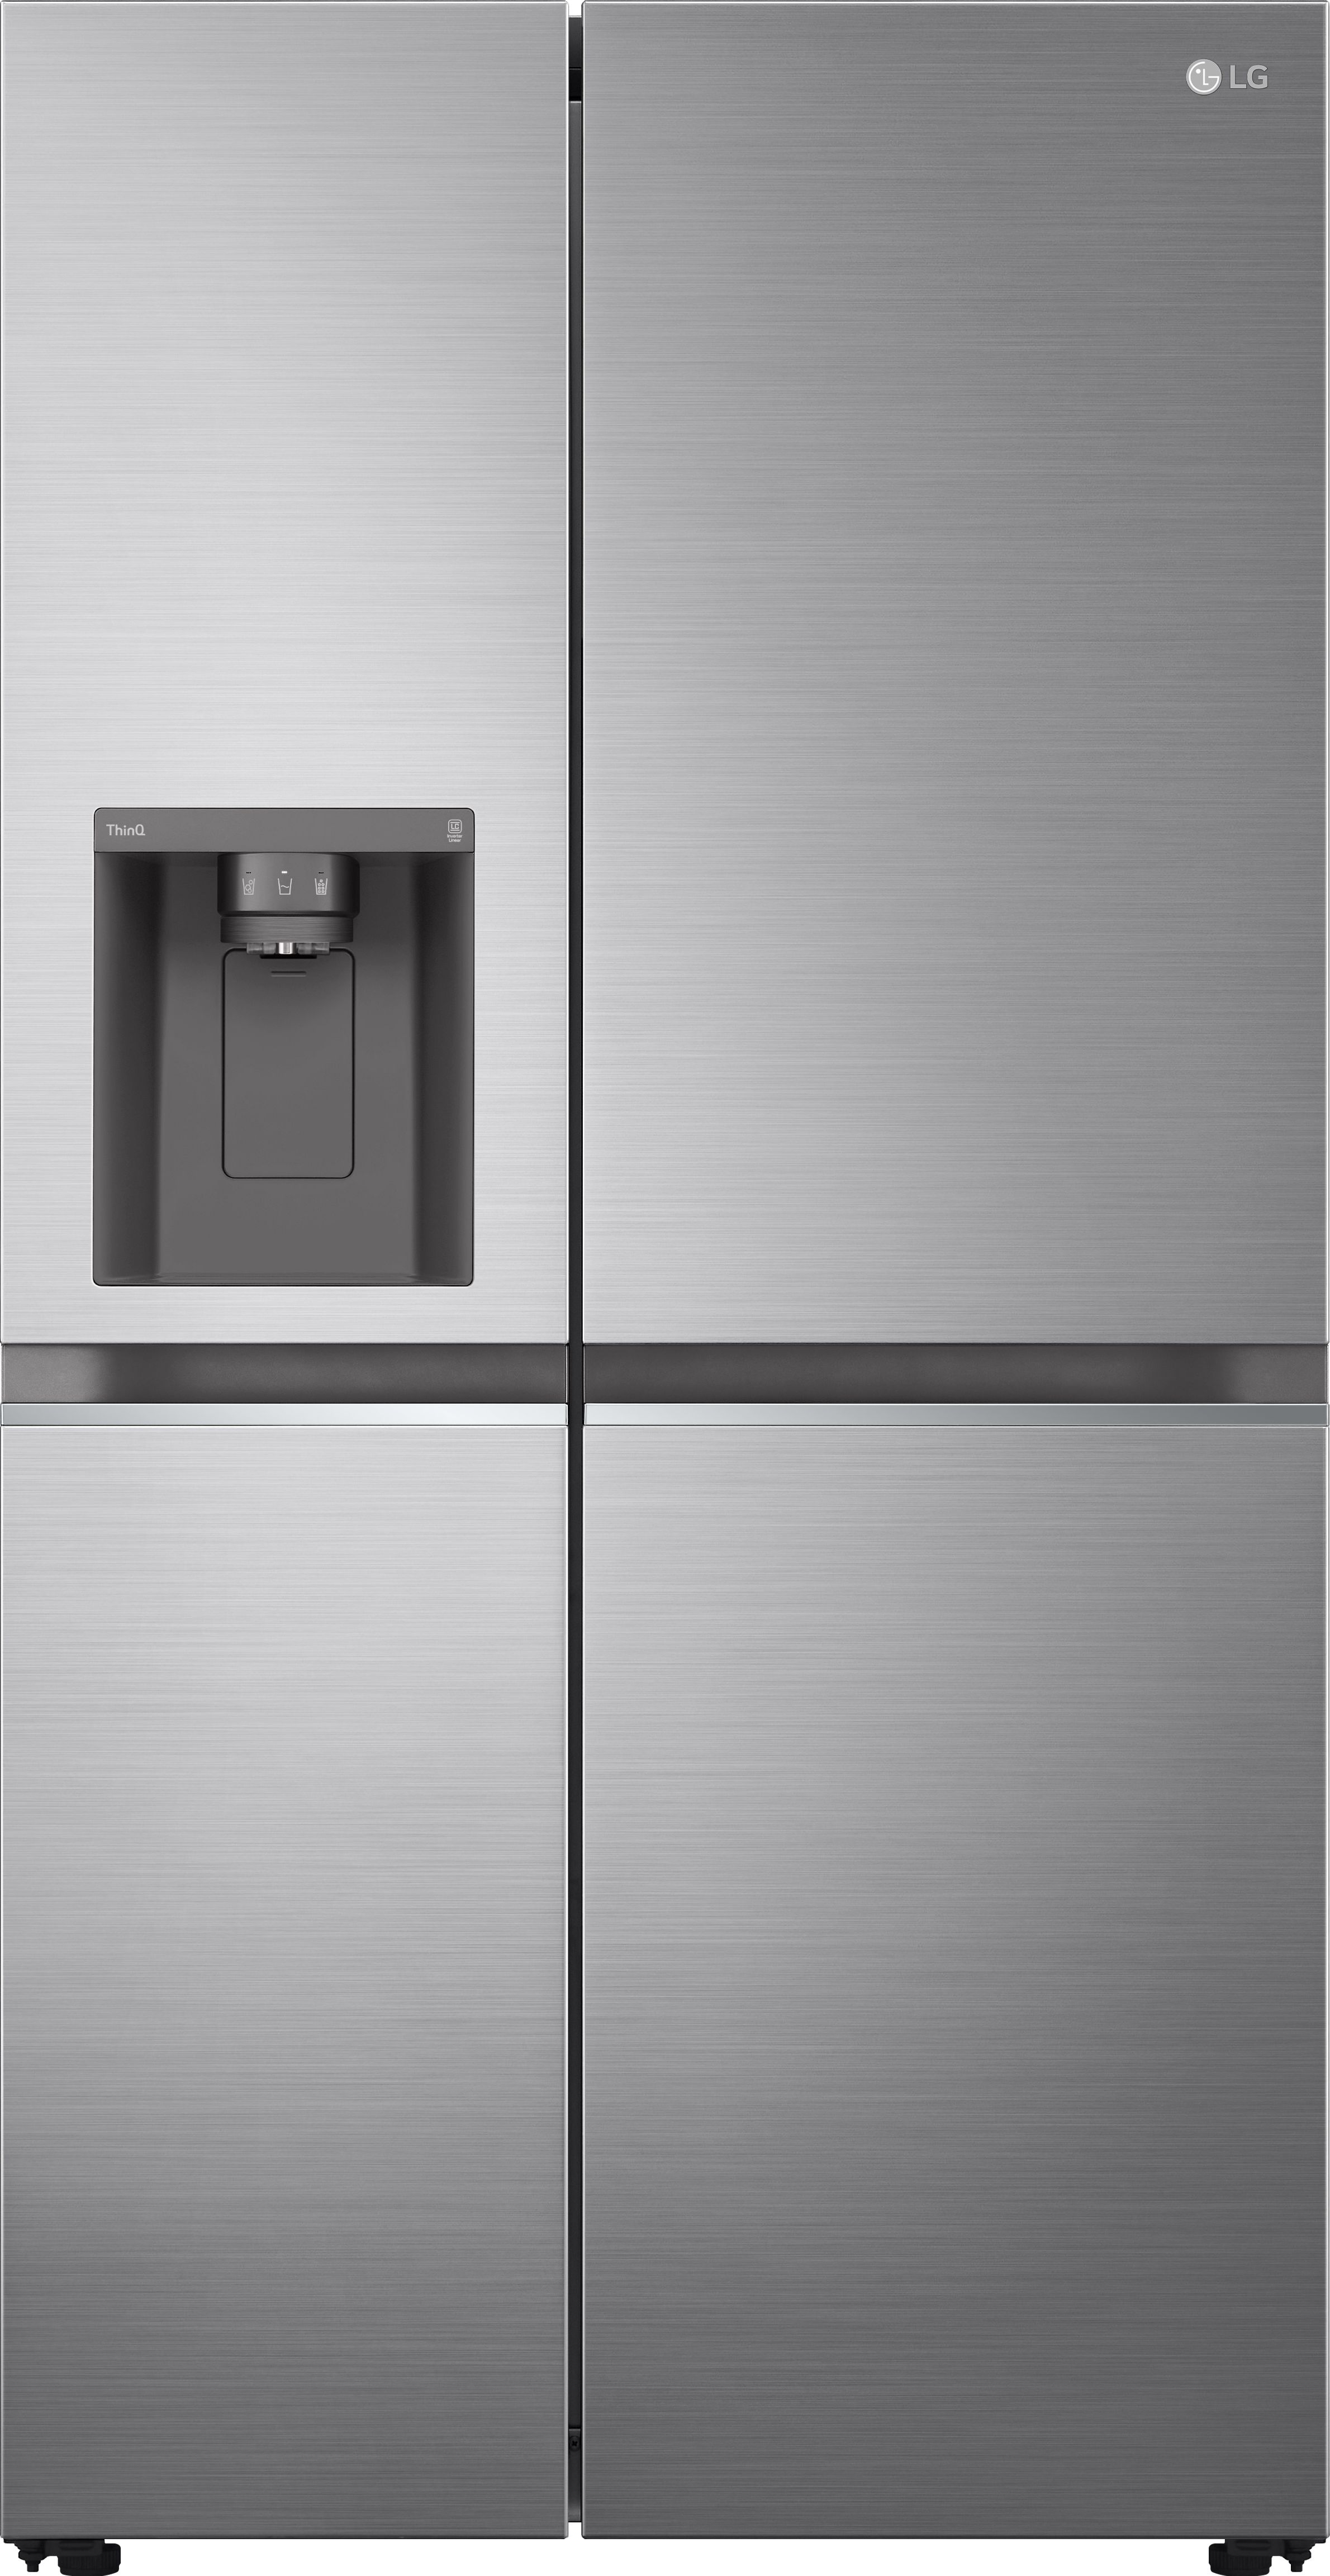 LG NatureFRESH GSLV70PZTD Wifi Connected Plumbed Frost Free American Fridge Freezer - Shiny Steel - D Rated, Silver